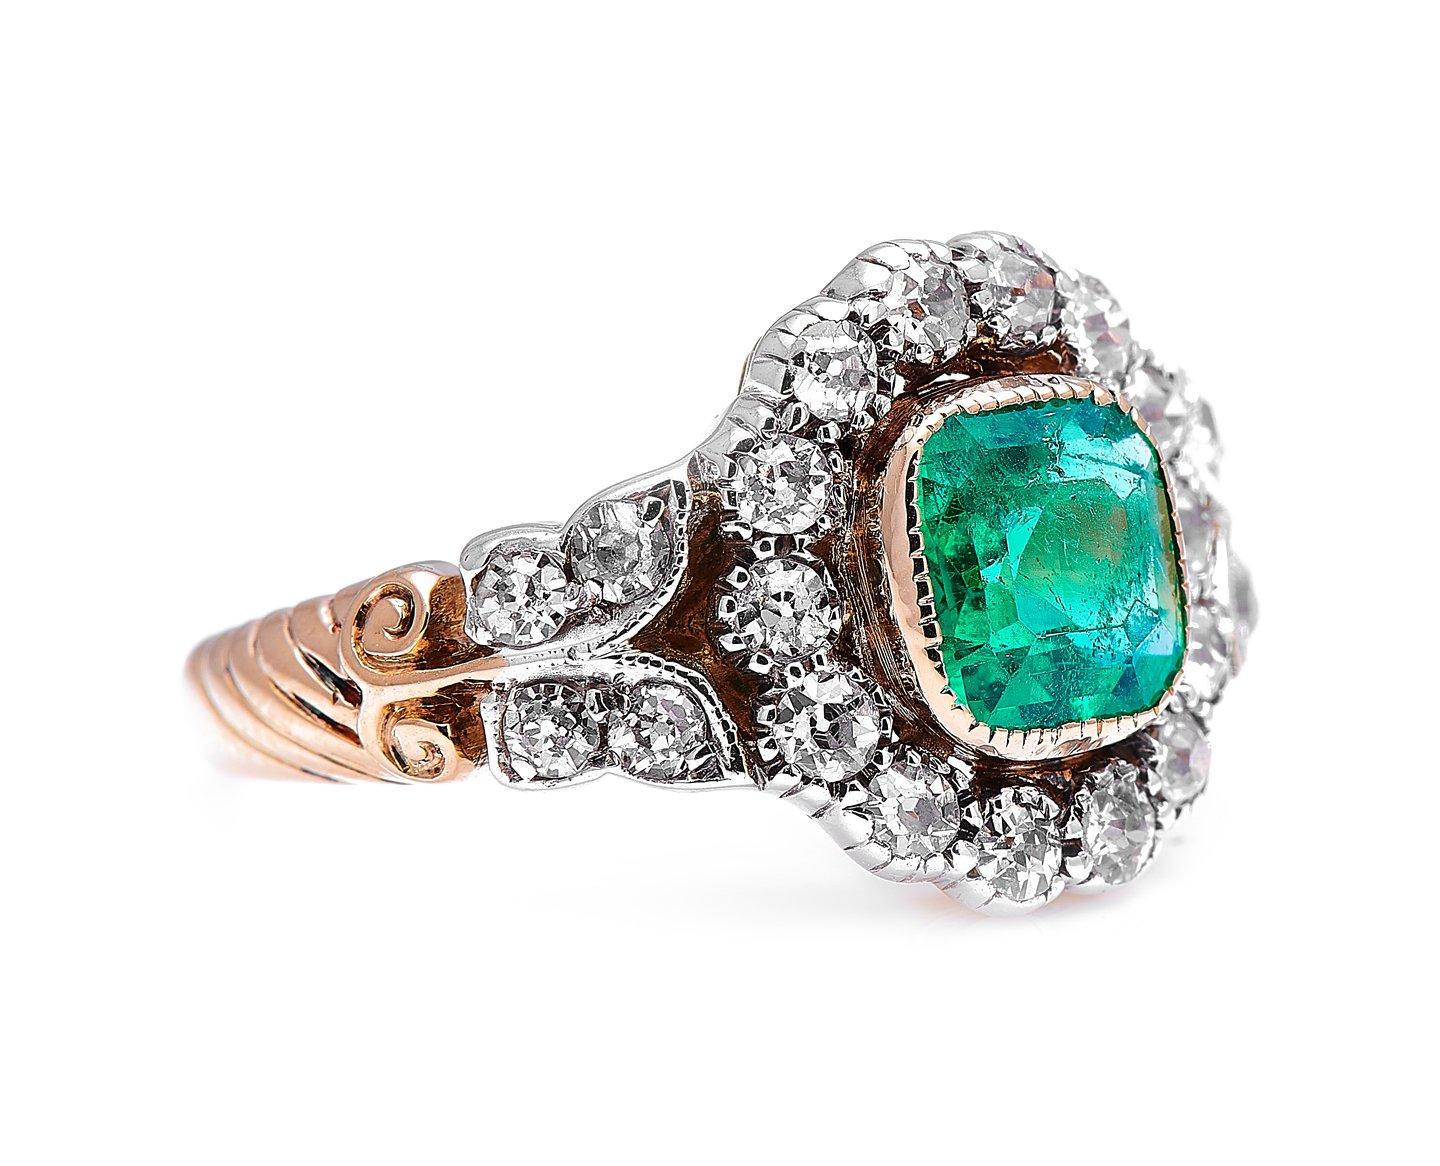 Emerald and diamond ring, early 20th century. With a beautiful octagonal step-cut emerald at its centre, this ring is an especially charming example of the ‘garland style’ which dominated jewellery design in the opening decade of the 20th century.